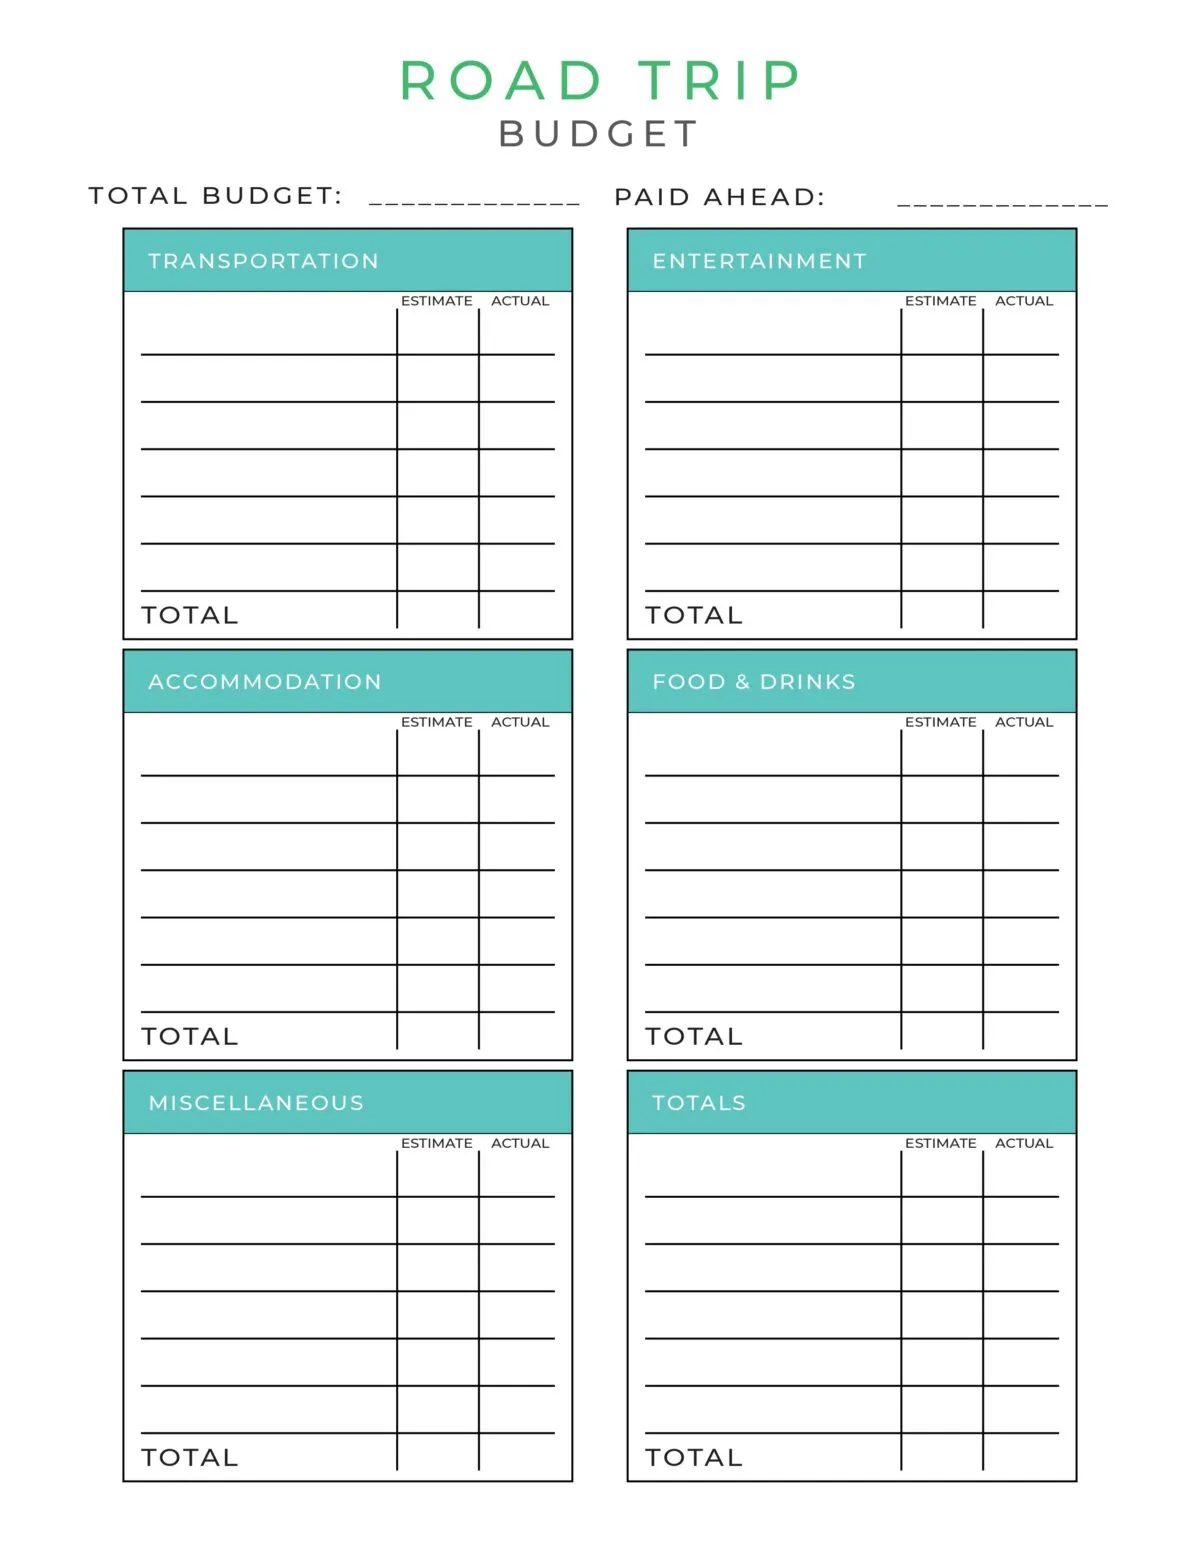 This free printable road trip planner will help you get organized. Keep track of your itinerary, packing lists, budget, and more.